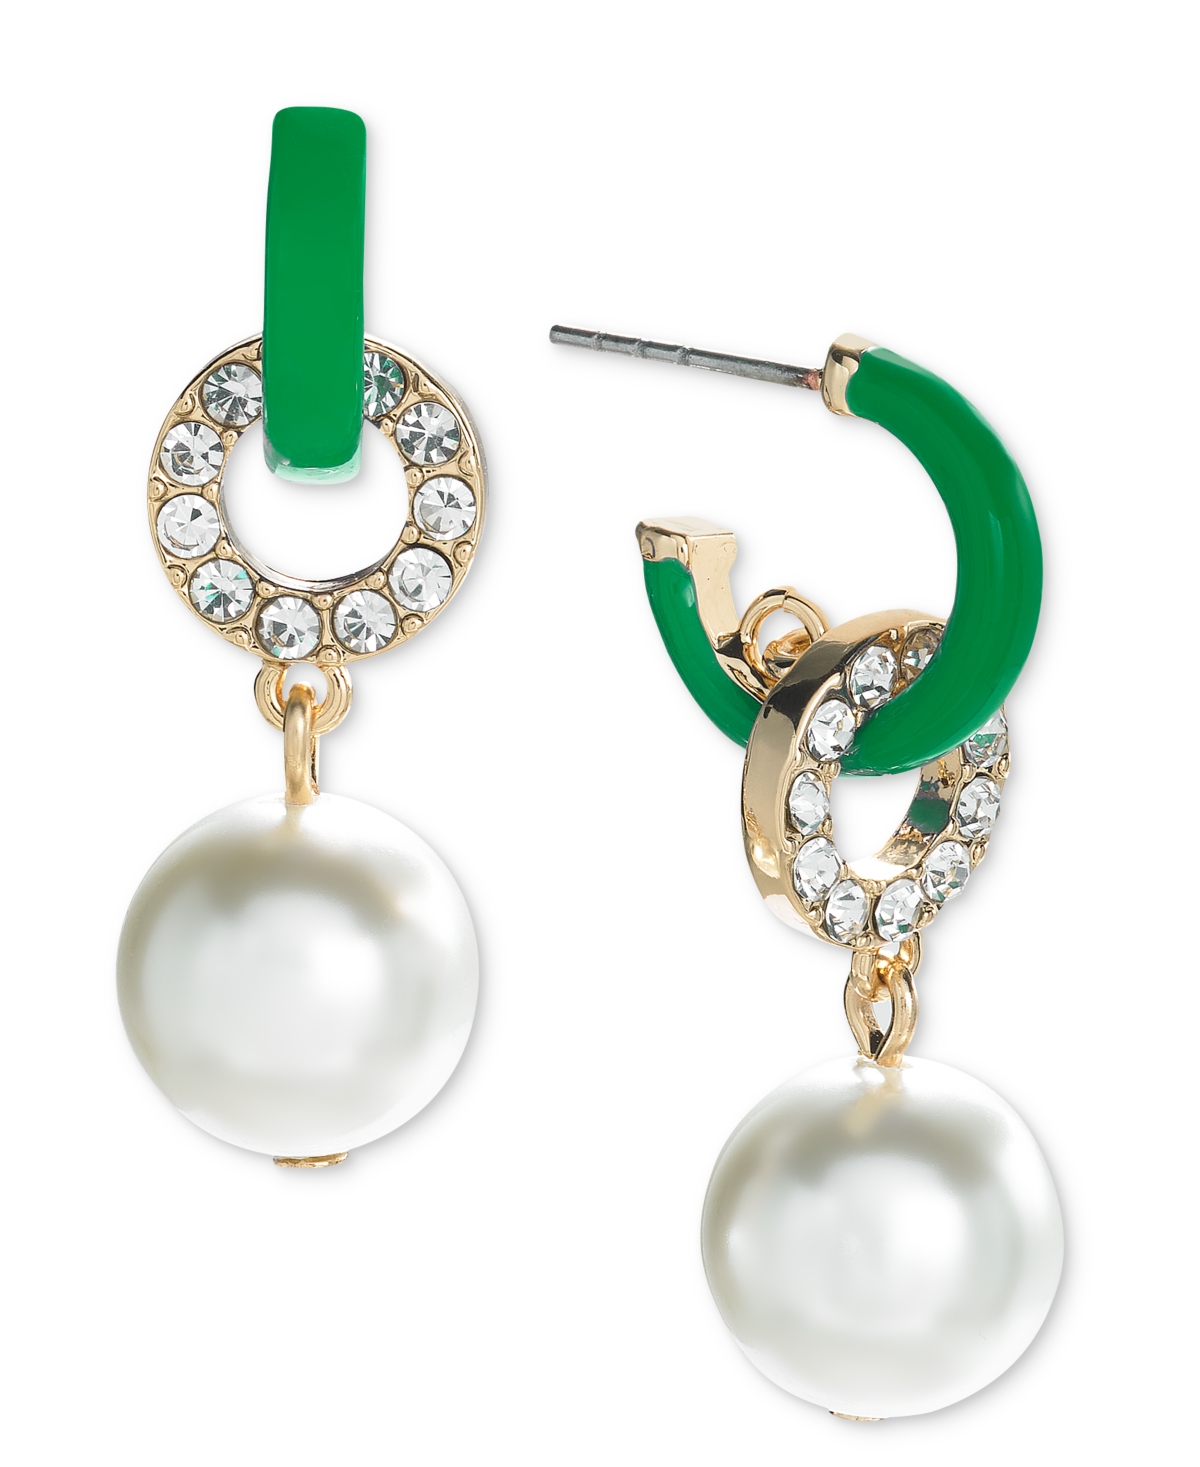 Gold-Tone Pave Ring & Imitation Pearl Charm C-Hoop Earrings, Created for Macy's - Blue